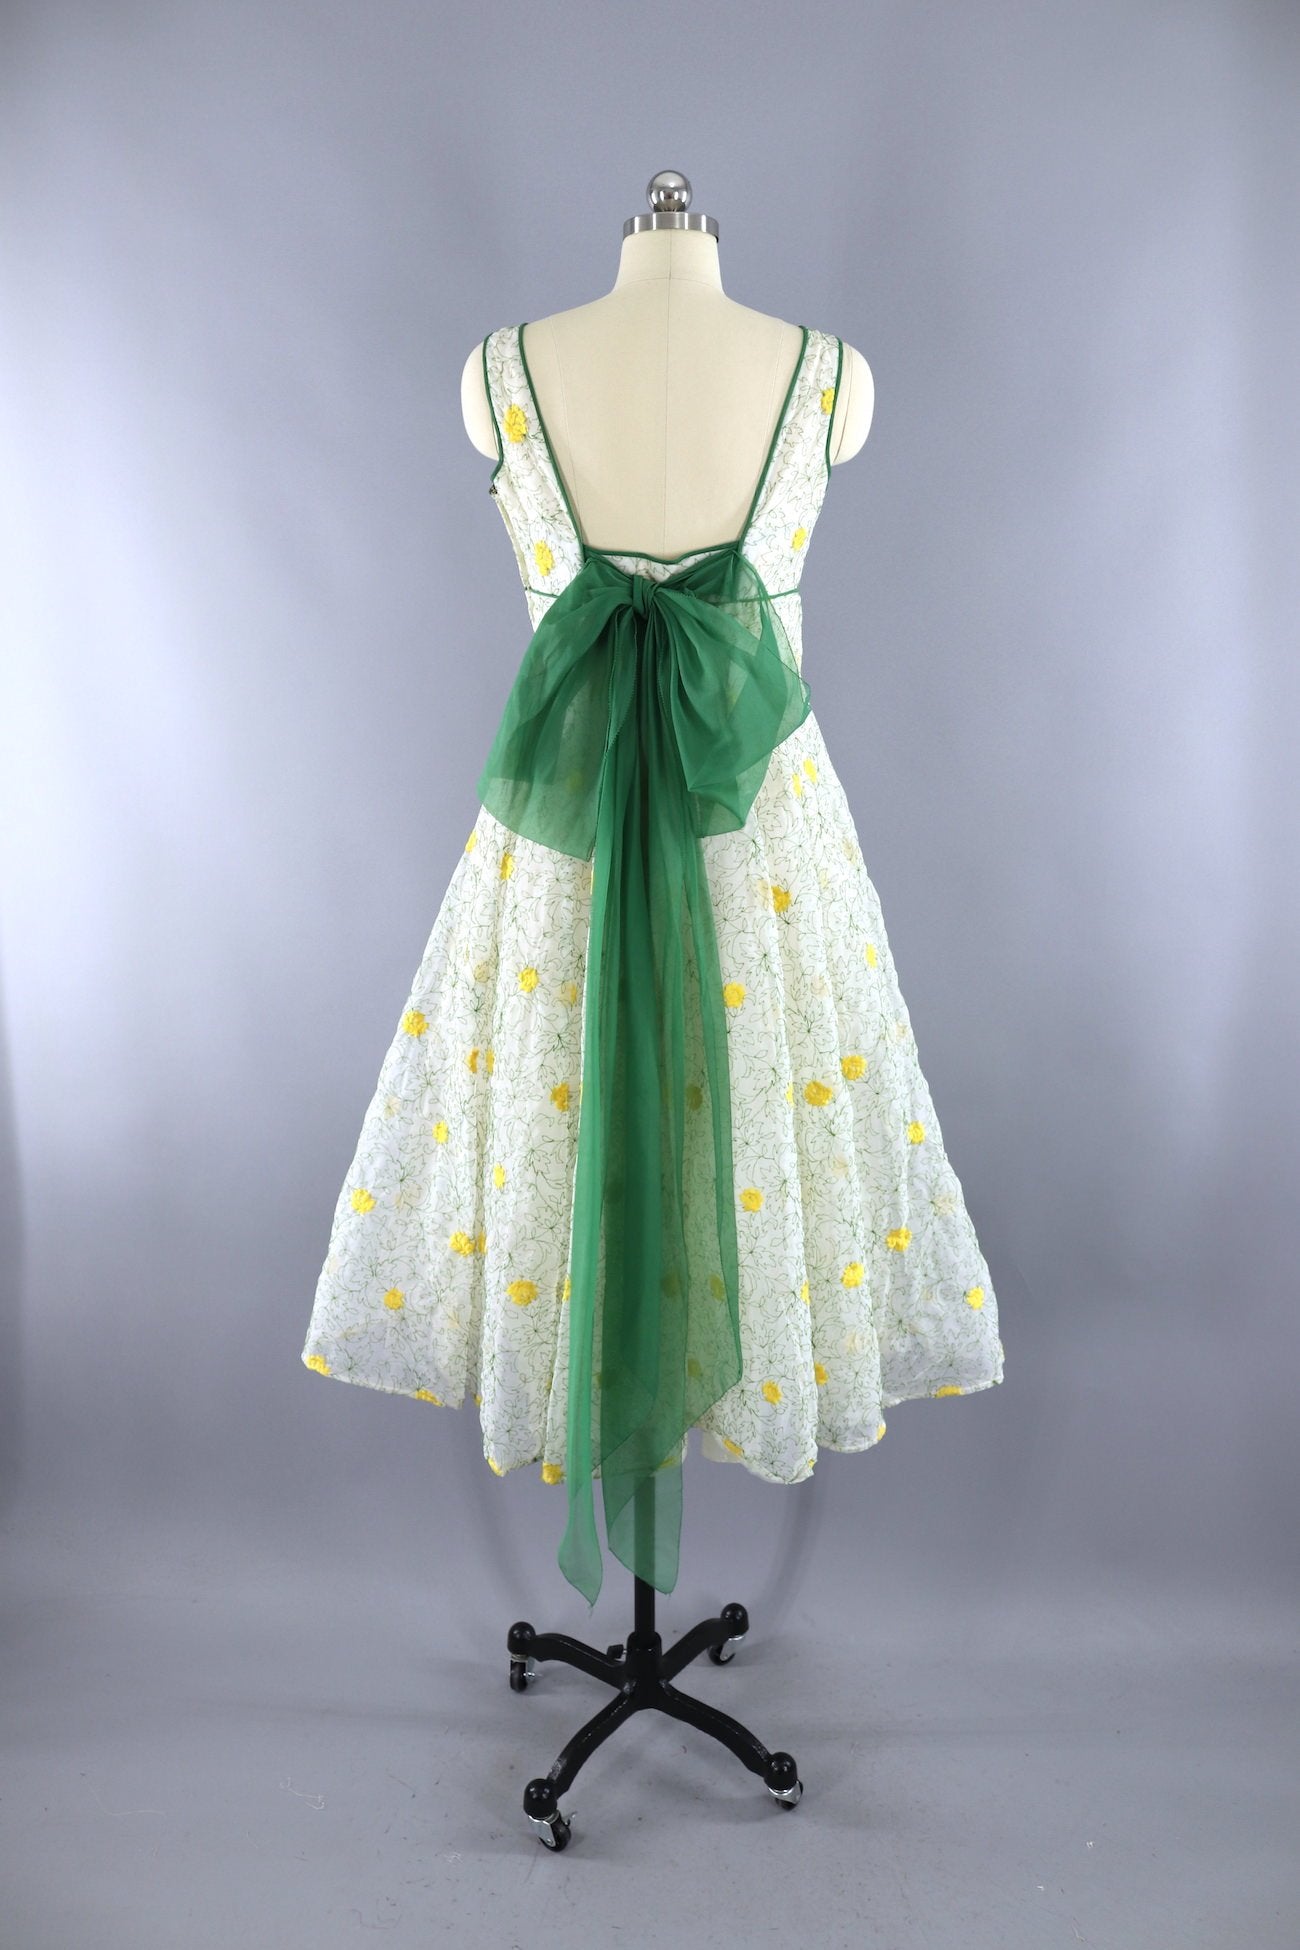 Vintage 1950s Garden Party Dress / White and Yellow Floral Embroidery - ThisBlueBird